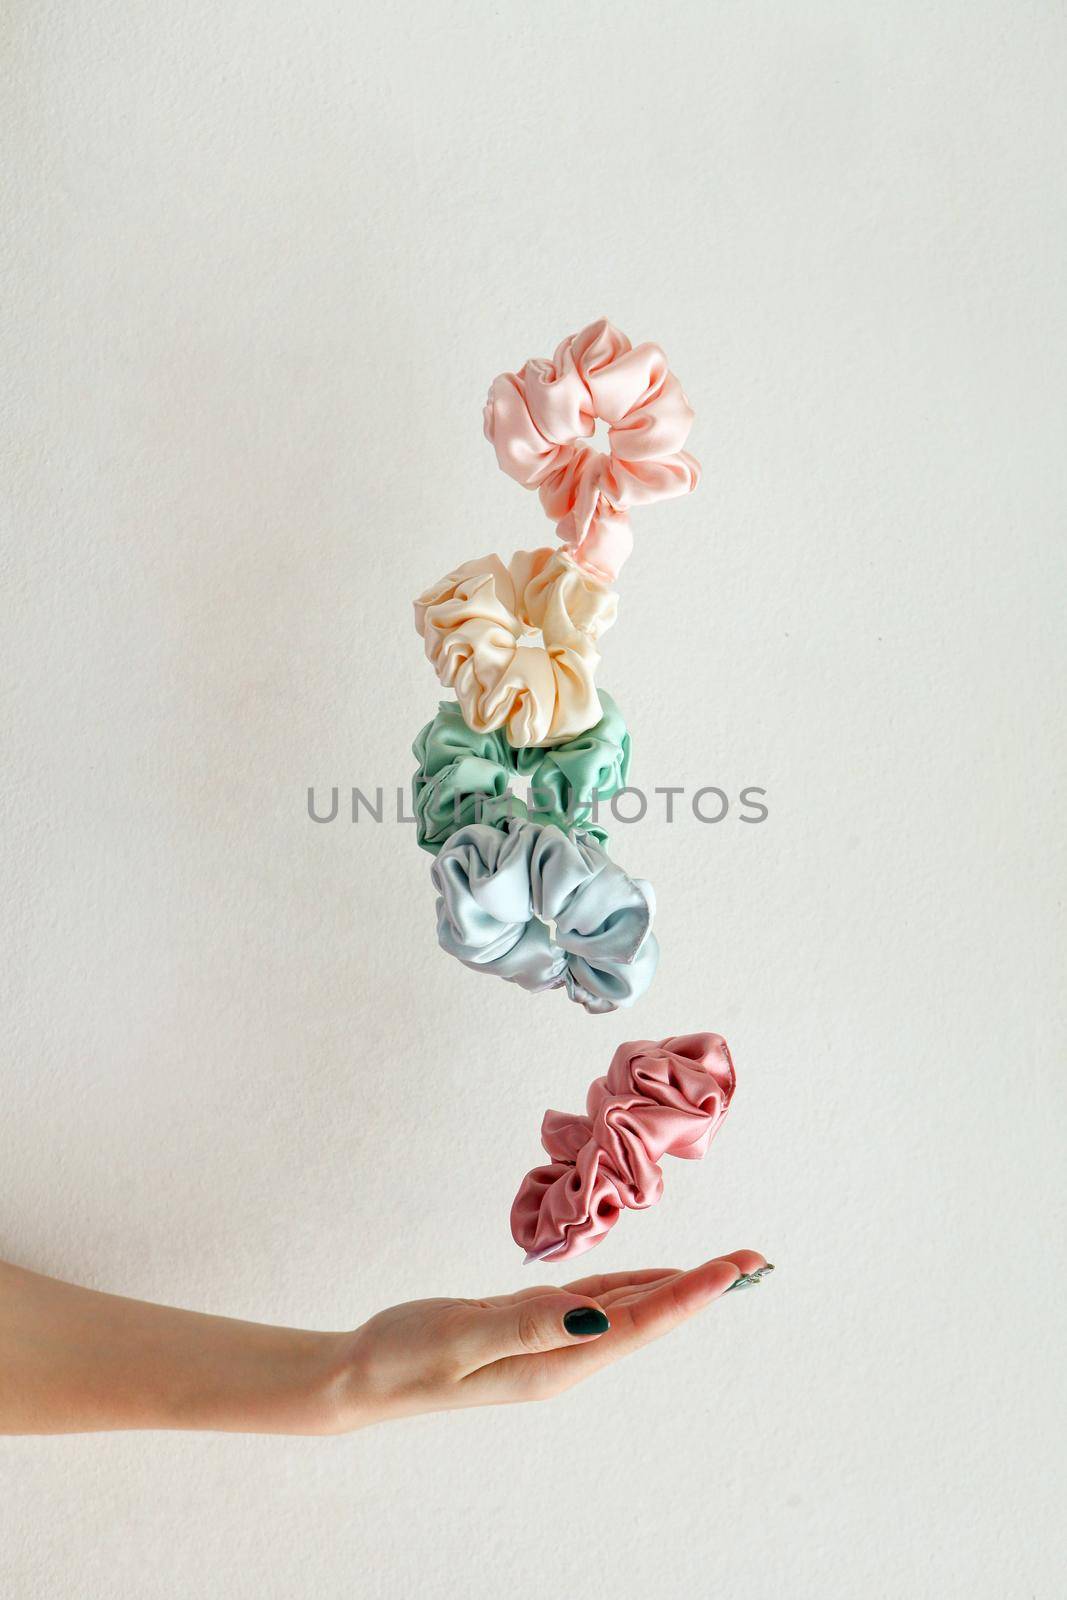 Lot of floating Colorful silk Scrunchies on womas hand isolated white. Hairdressing tools and accessories. Hair Scrunchies, Elastic HairBands, flying or falling Scrunchie Hairband for girls or ladies